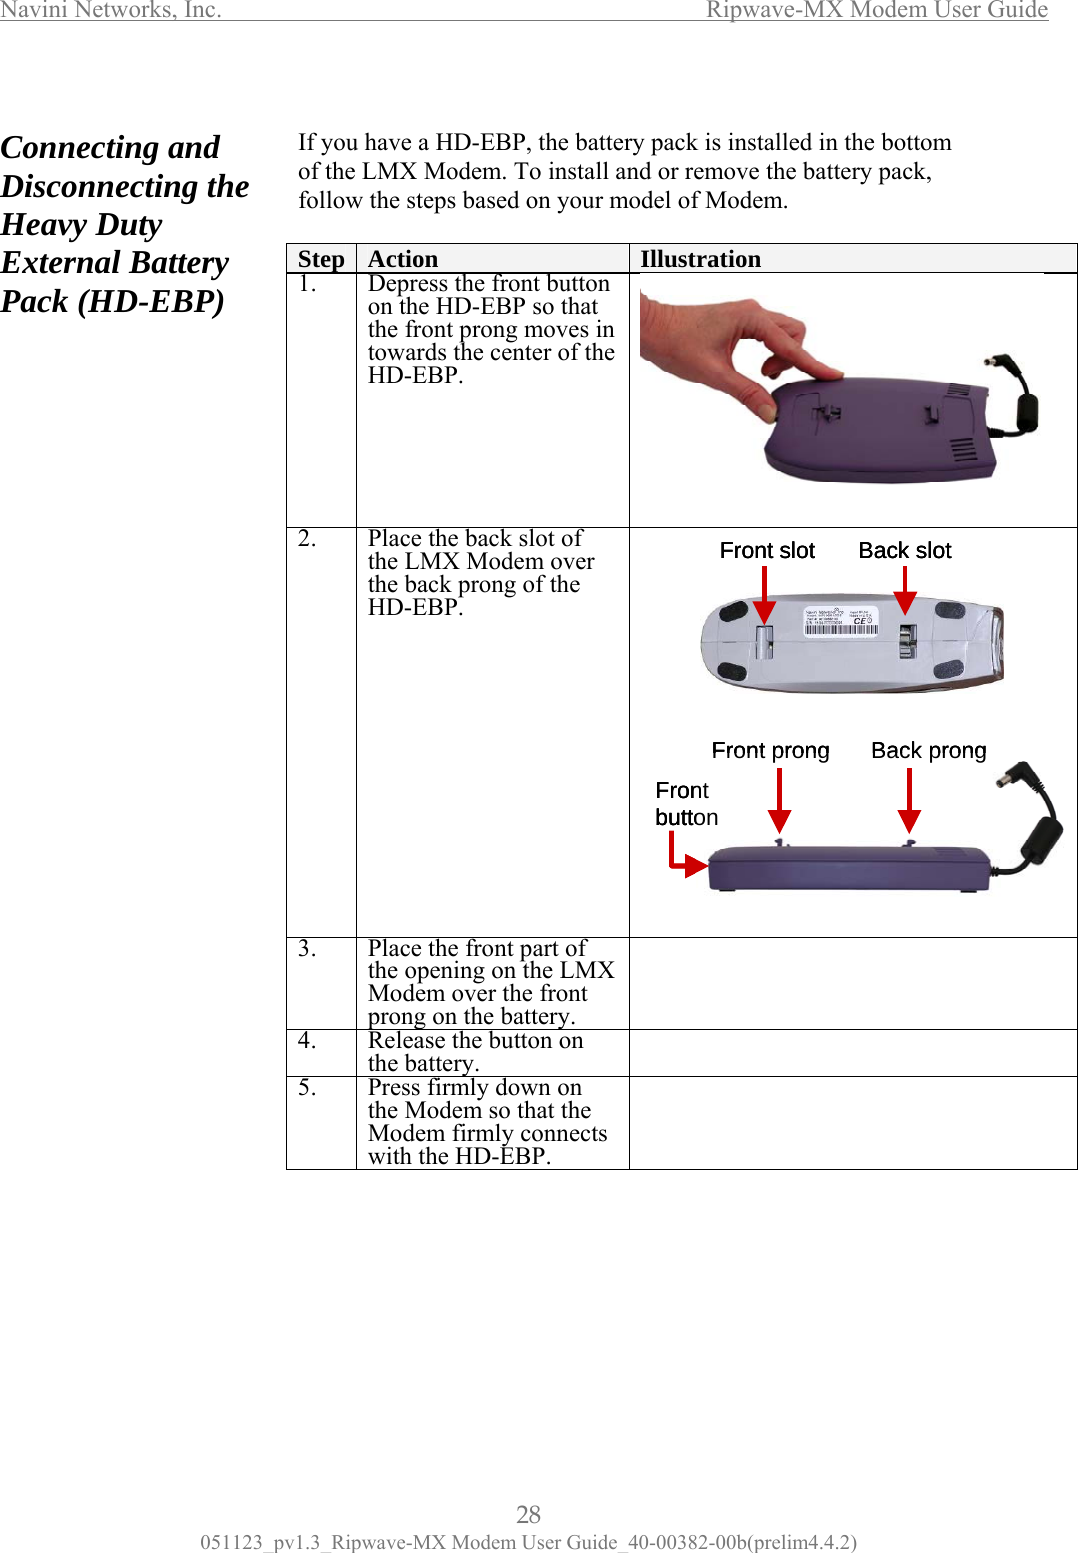 Navini Networks, Inc.                  Ripwave-MX Modem User Guide 051123_pv1.3_Ripwave-MX Modem User Guide_40-00382-00b(prelim4.4.2) nd  isconnecting the eavy Duty xternal Battery ack (HD-EBP)  If yof t ck, foll  Connecting aDHEP                                        ou have a HD-EBP, the battery pack is installed in the bottom he LMX Modem. To install and or remove the battery paow the steps based on your model of Modem. Step  Action  Illustration 1.  De e front buon the HD-EBP so that the front prong moves intowards the center of theH press th tton   D-EBP. 2.  Place the back slot of the LMX Modem over the back prong of the HD-EBP.  3.  Place the front part of the opening on the LMX Modem over the front prong on the battery.  4.  Release the button on the battery.   5.  Press firmly down on the Modem so that the Modem firmly connects with the HD-EBP.           FrontbuttonFront prong Back prongFront slot Back slotFrontbuttonFront prong Back prongFrontbuttonFront prong Back prongFront slot Back slotFront slot Back sl ot28 